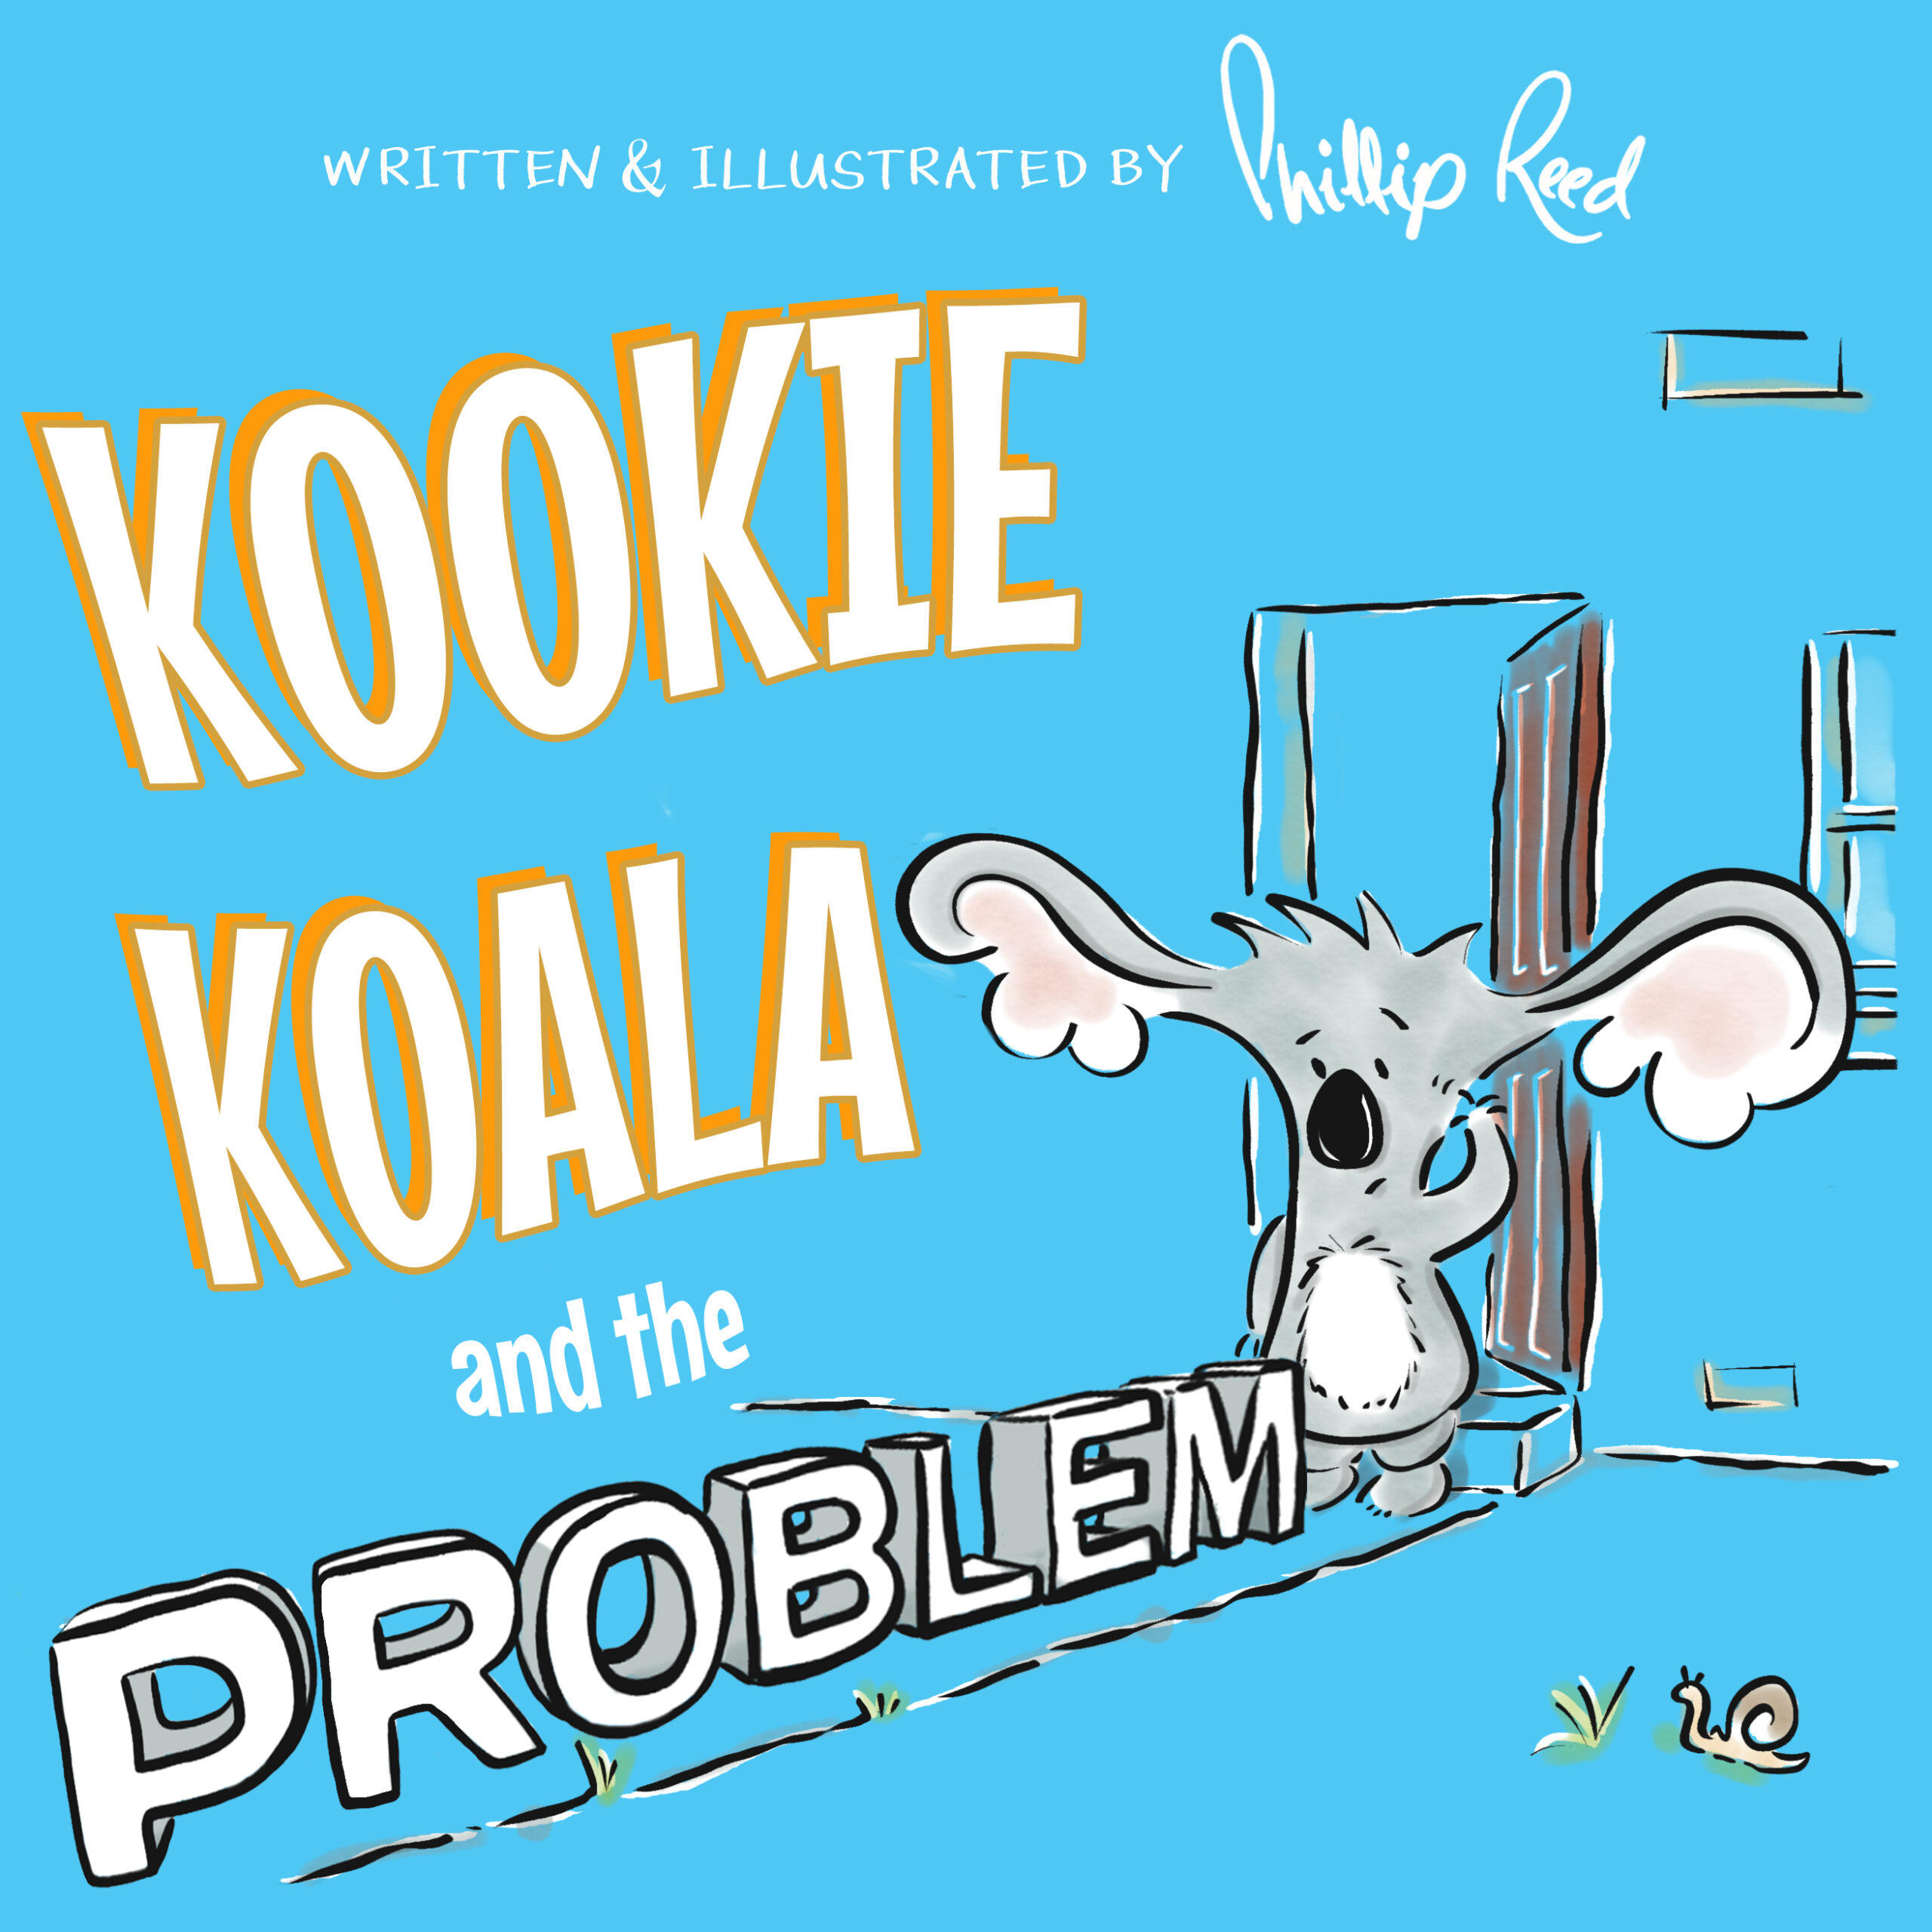 FREE: Kookie Koala and the Problem by Phillip Reed by Phillip Reed